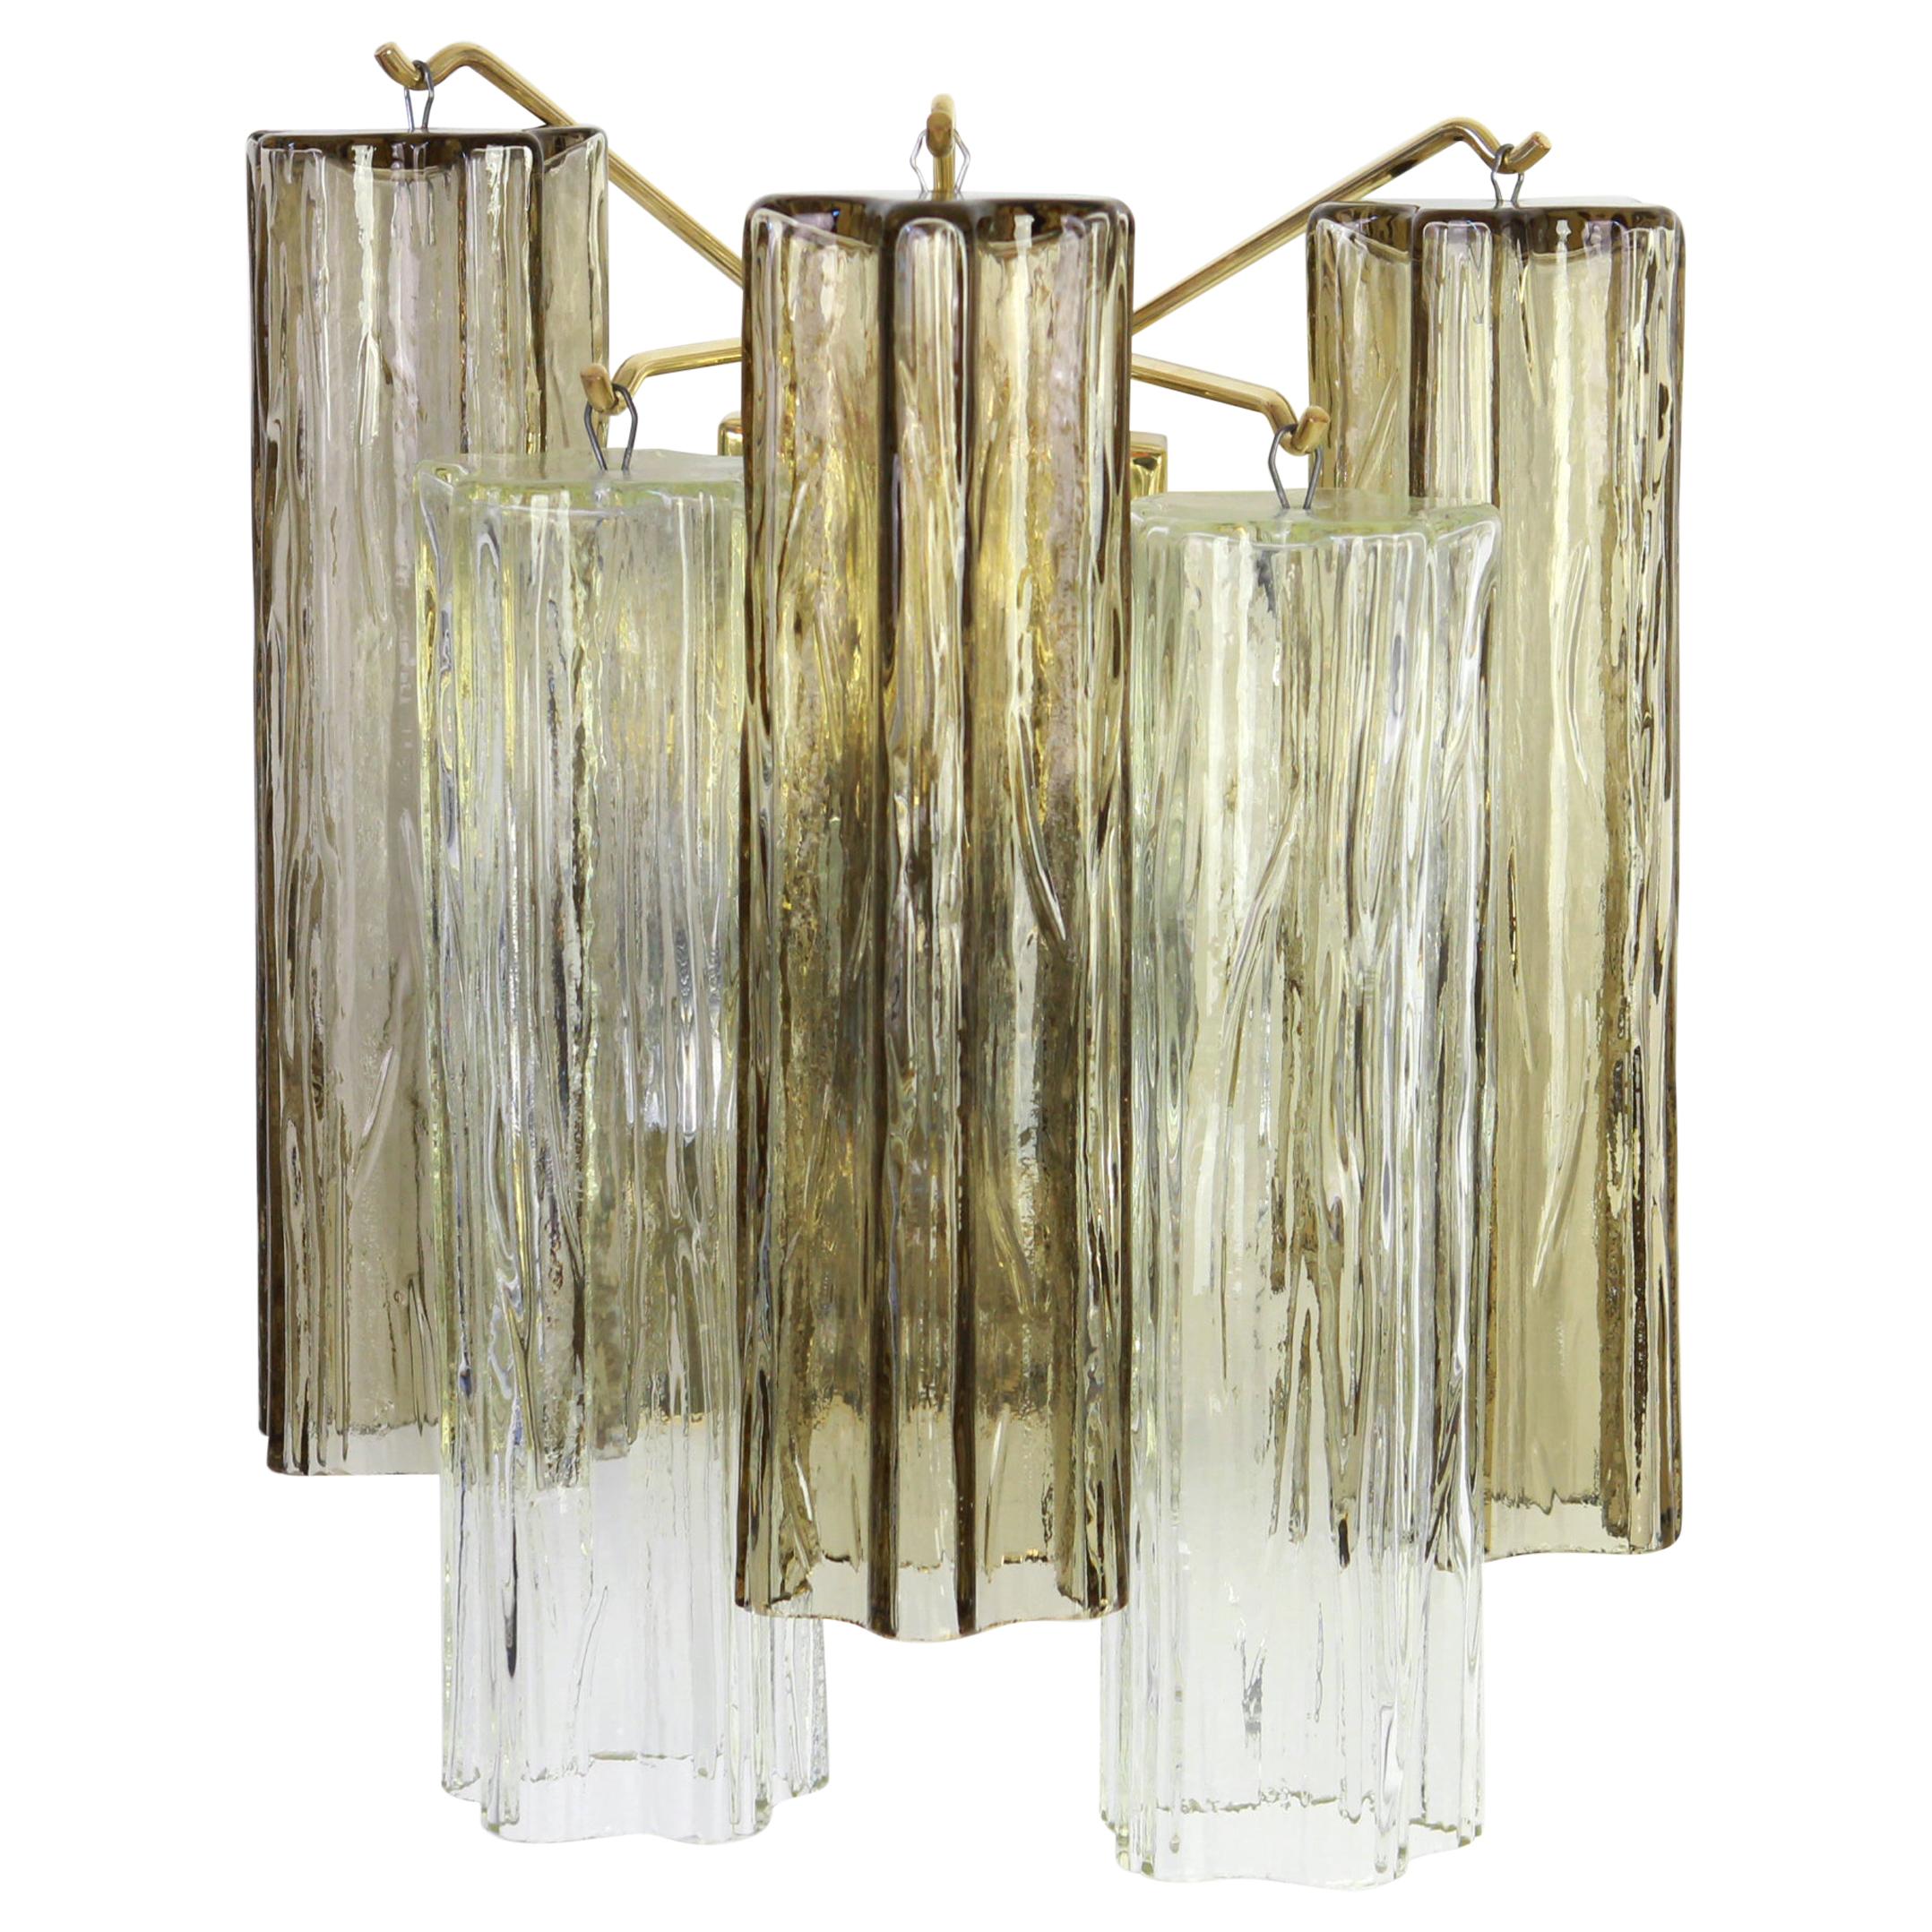 Wonderful pair of midcentury wall sconces with three large Murano glass pieces on a brass frame in each wall lamp, designed by Venini and made by Kalmar, Austria, manufactured, circa 1960-1969.
Each sconce needs two x E27 standard bulbs.
Light